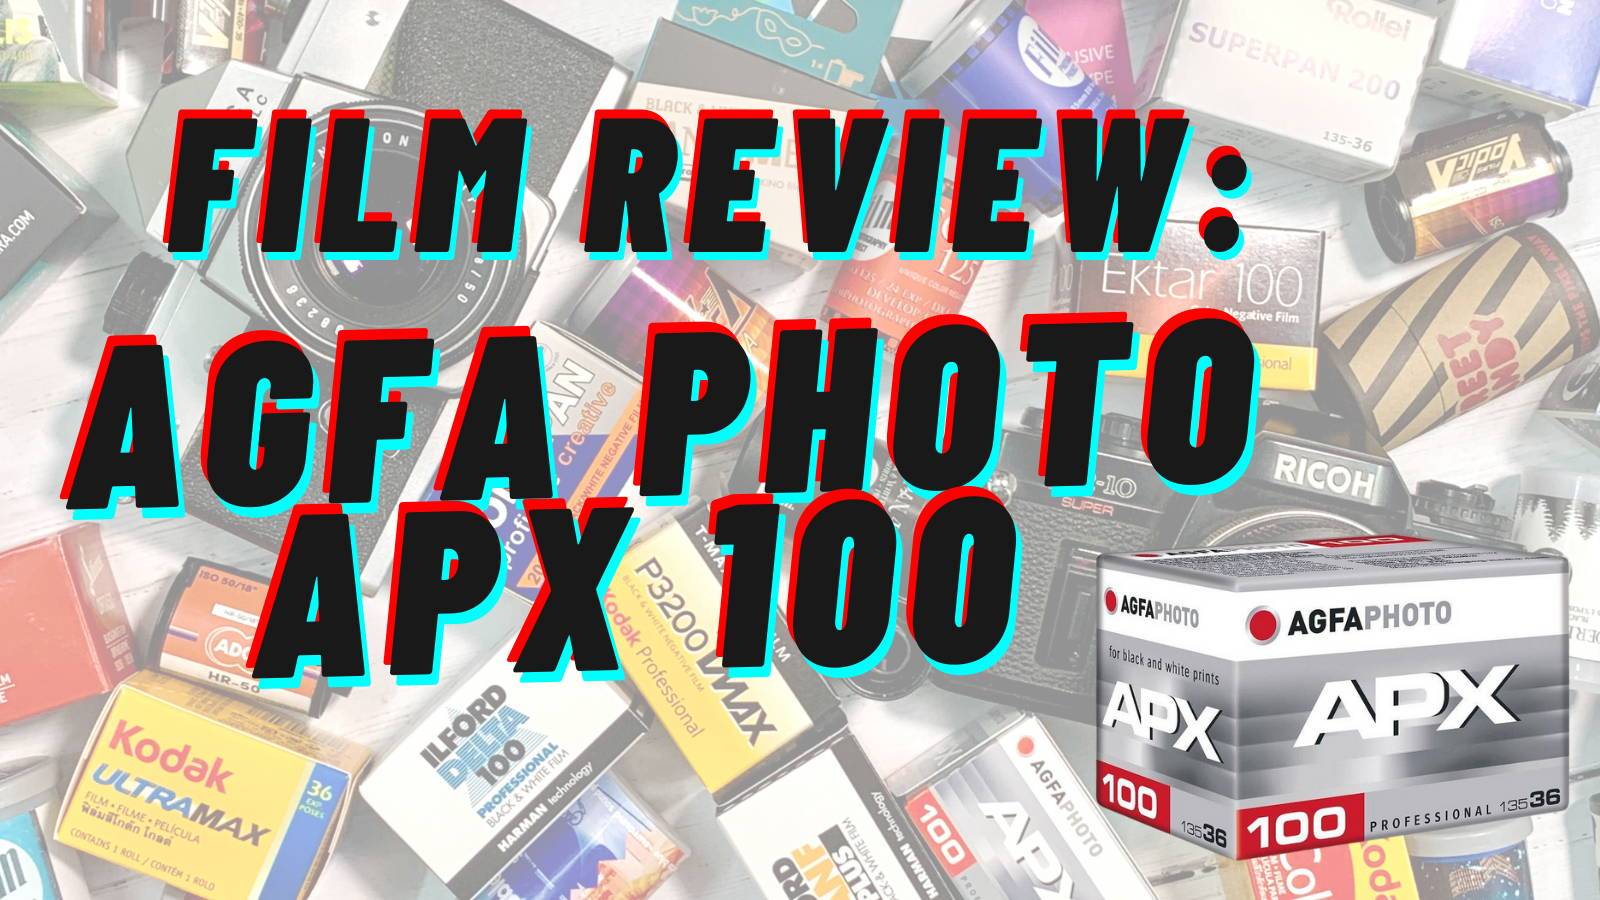 AgfaPhoto APX 100 Film Review - Analogue Wonderland